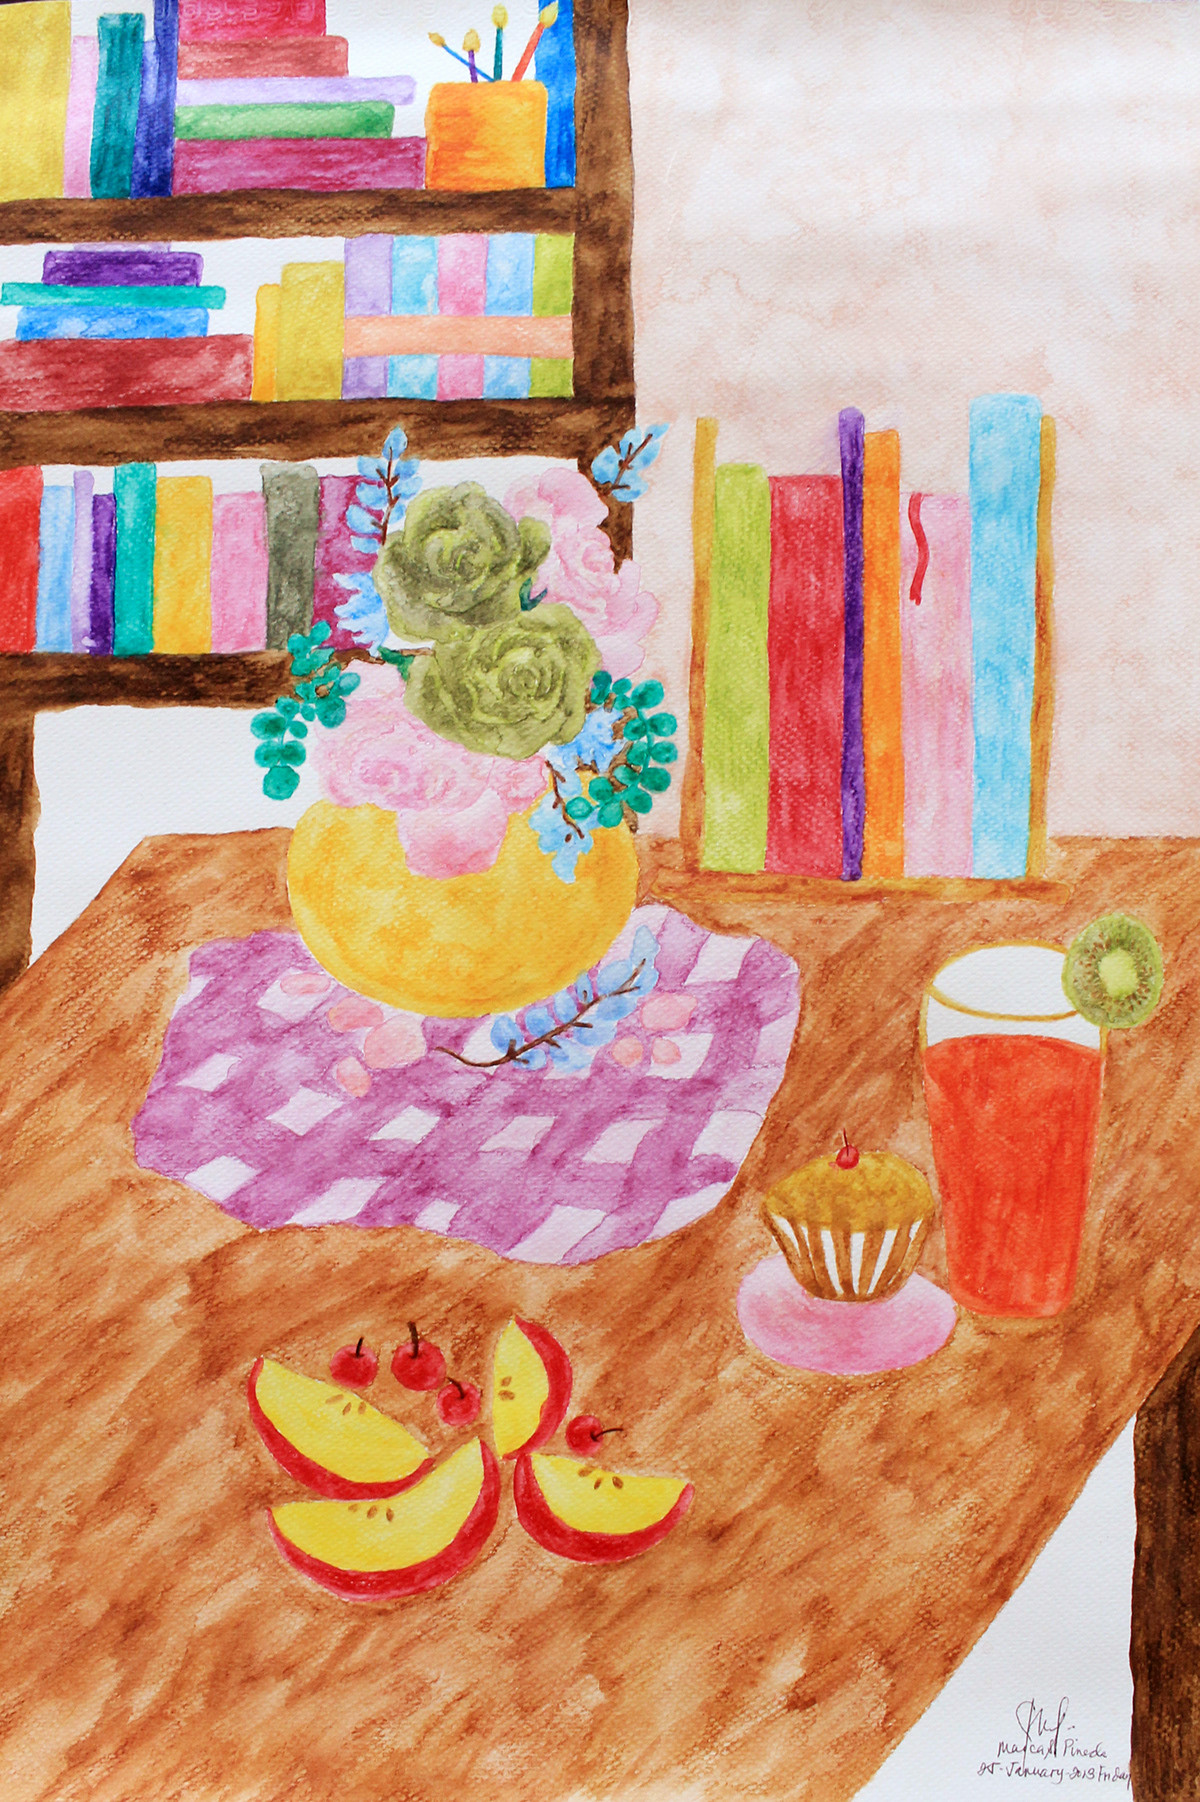 books  library   Still life Flowers watercolor  pencil  Illustration  FOOD  desserts  Sweets  reading home